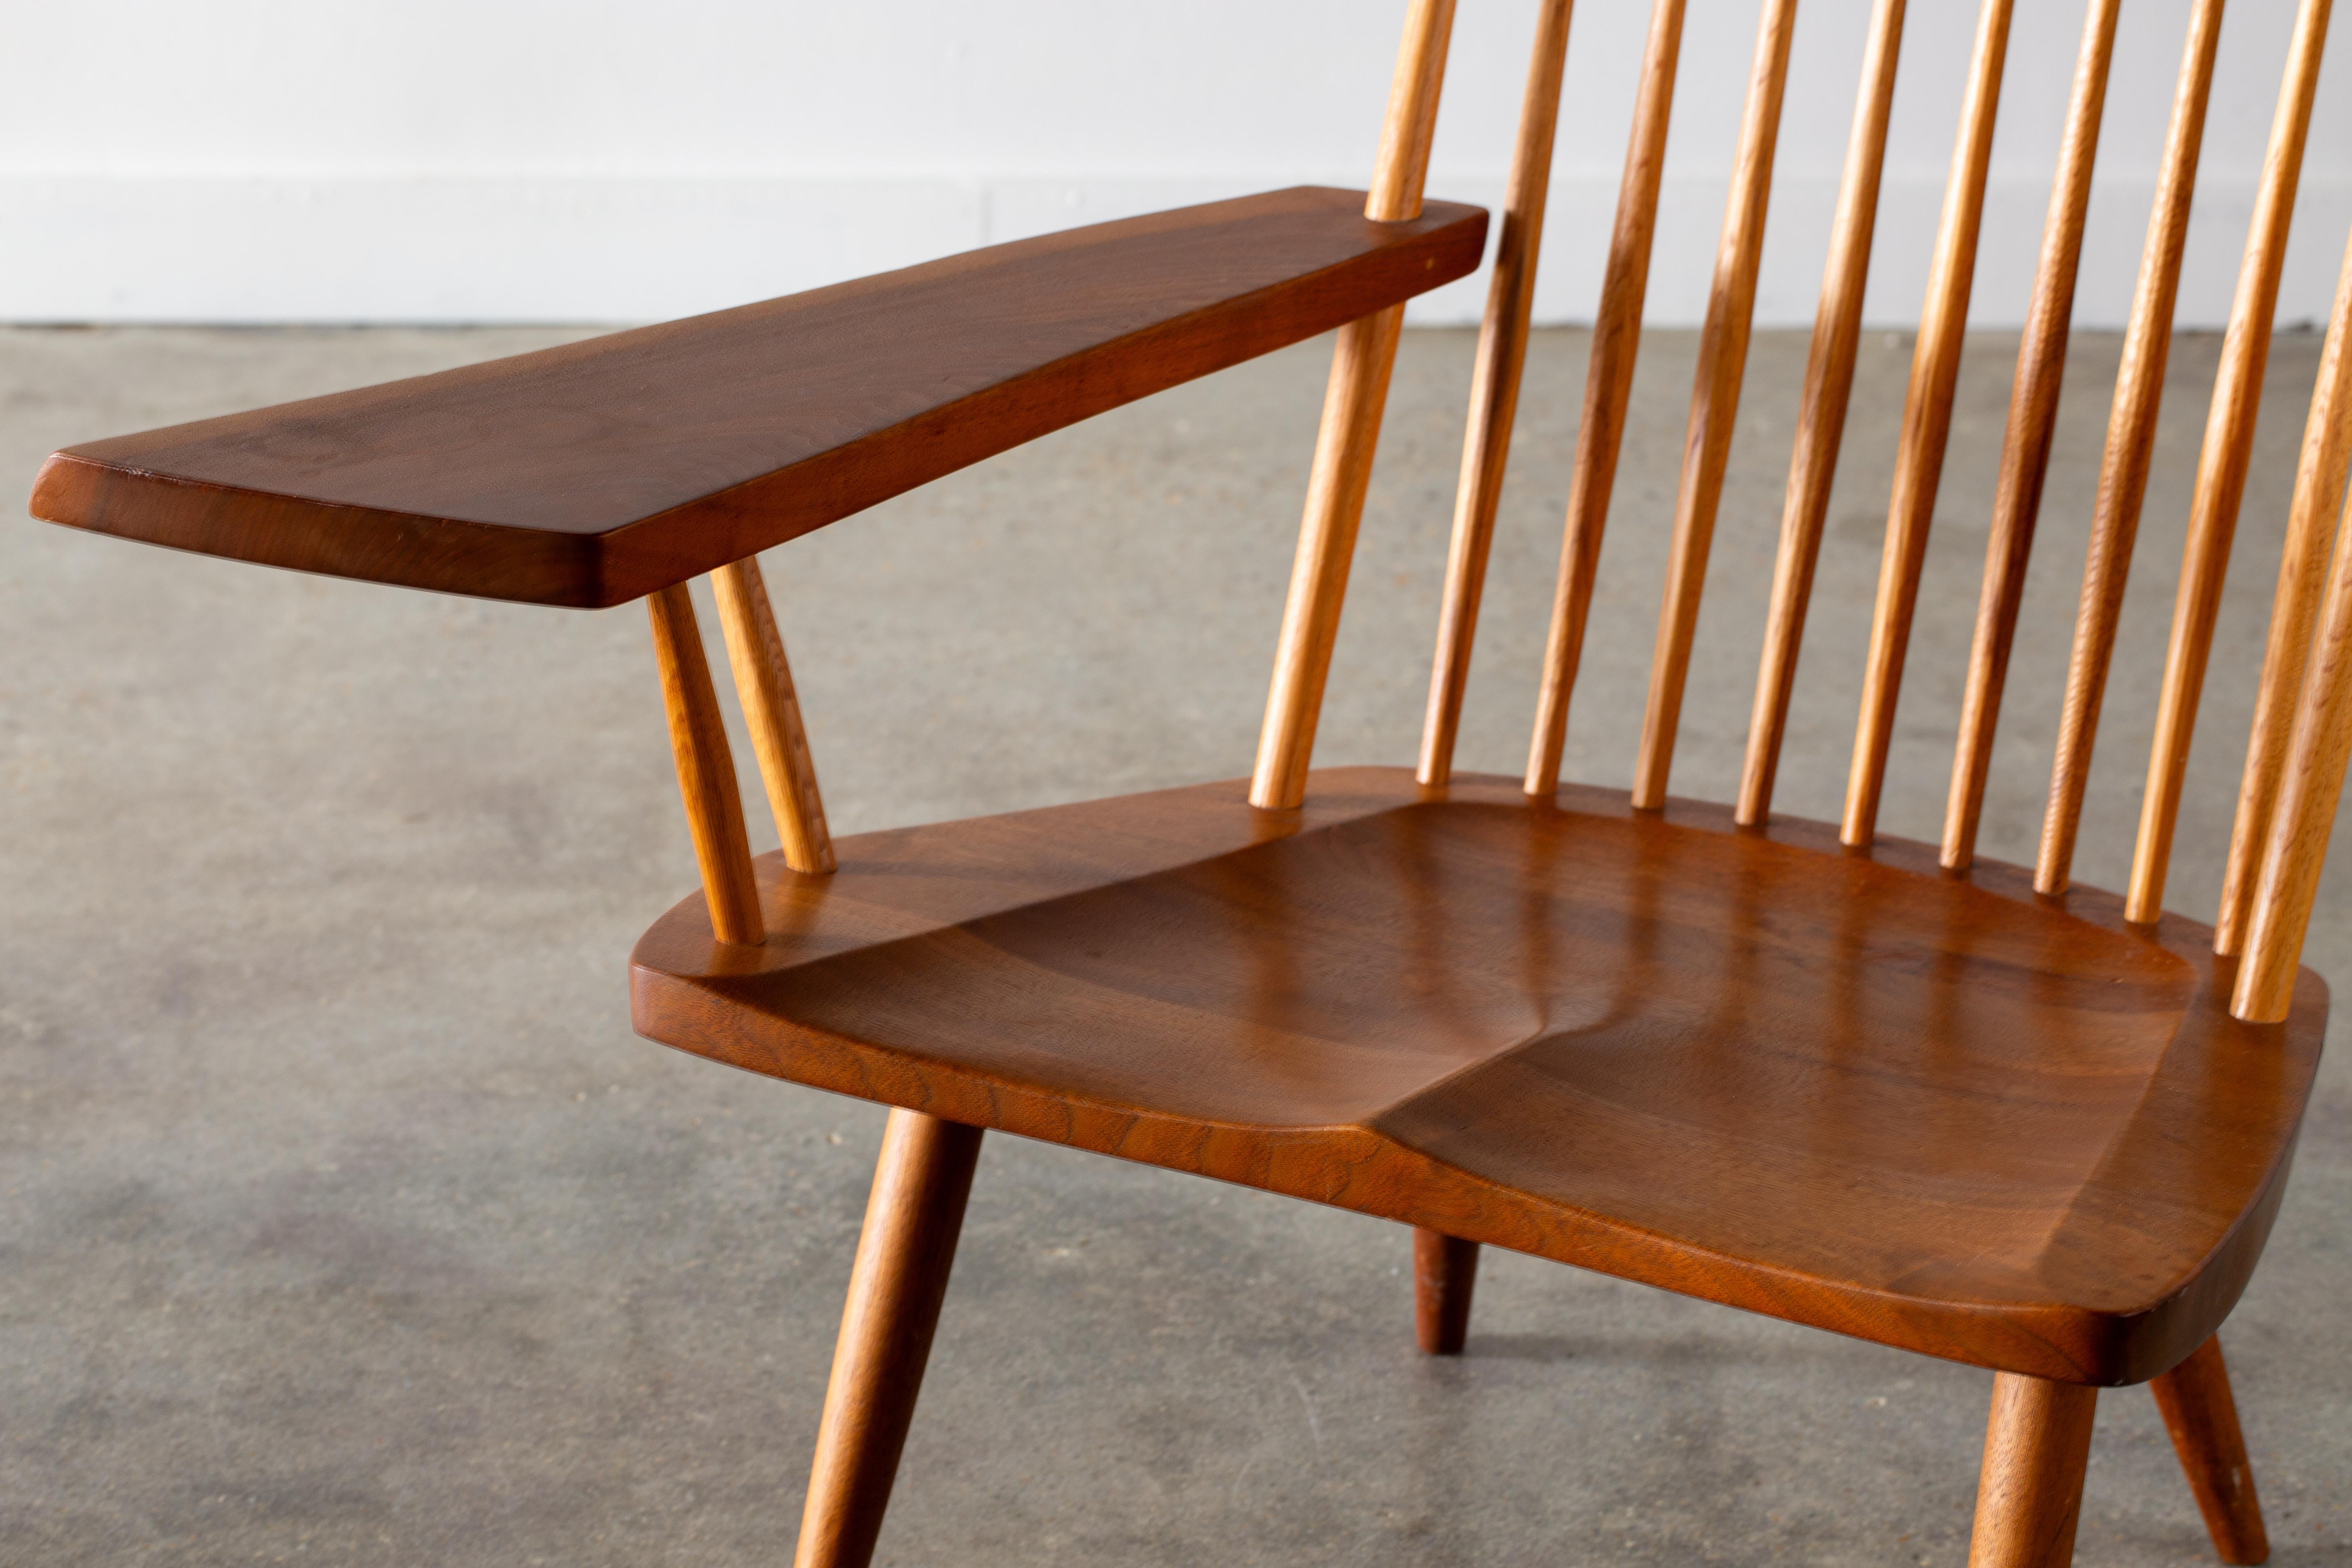 1975 George Nakashima Studio Lounge Chair with Free Form Arm Walnut and Hickory For Sale 4